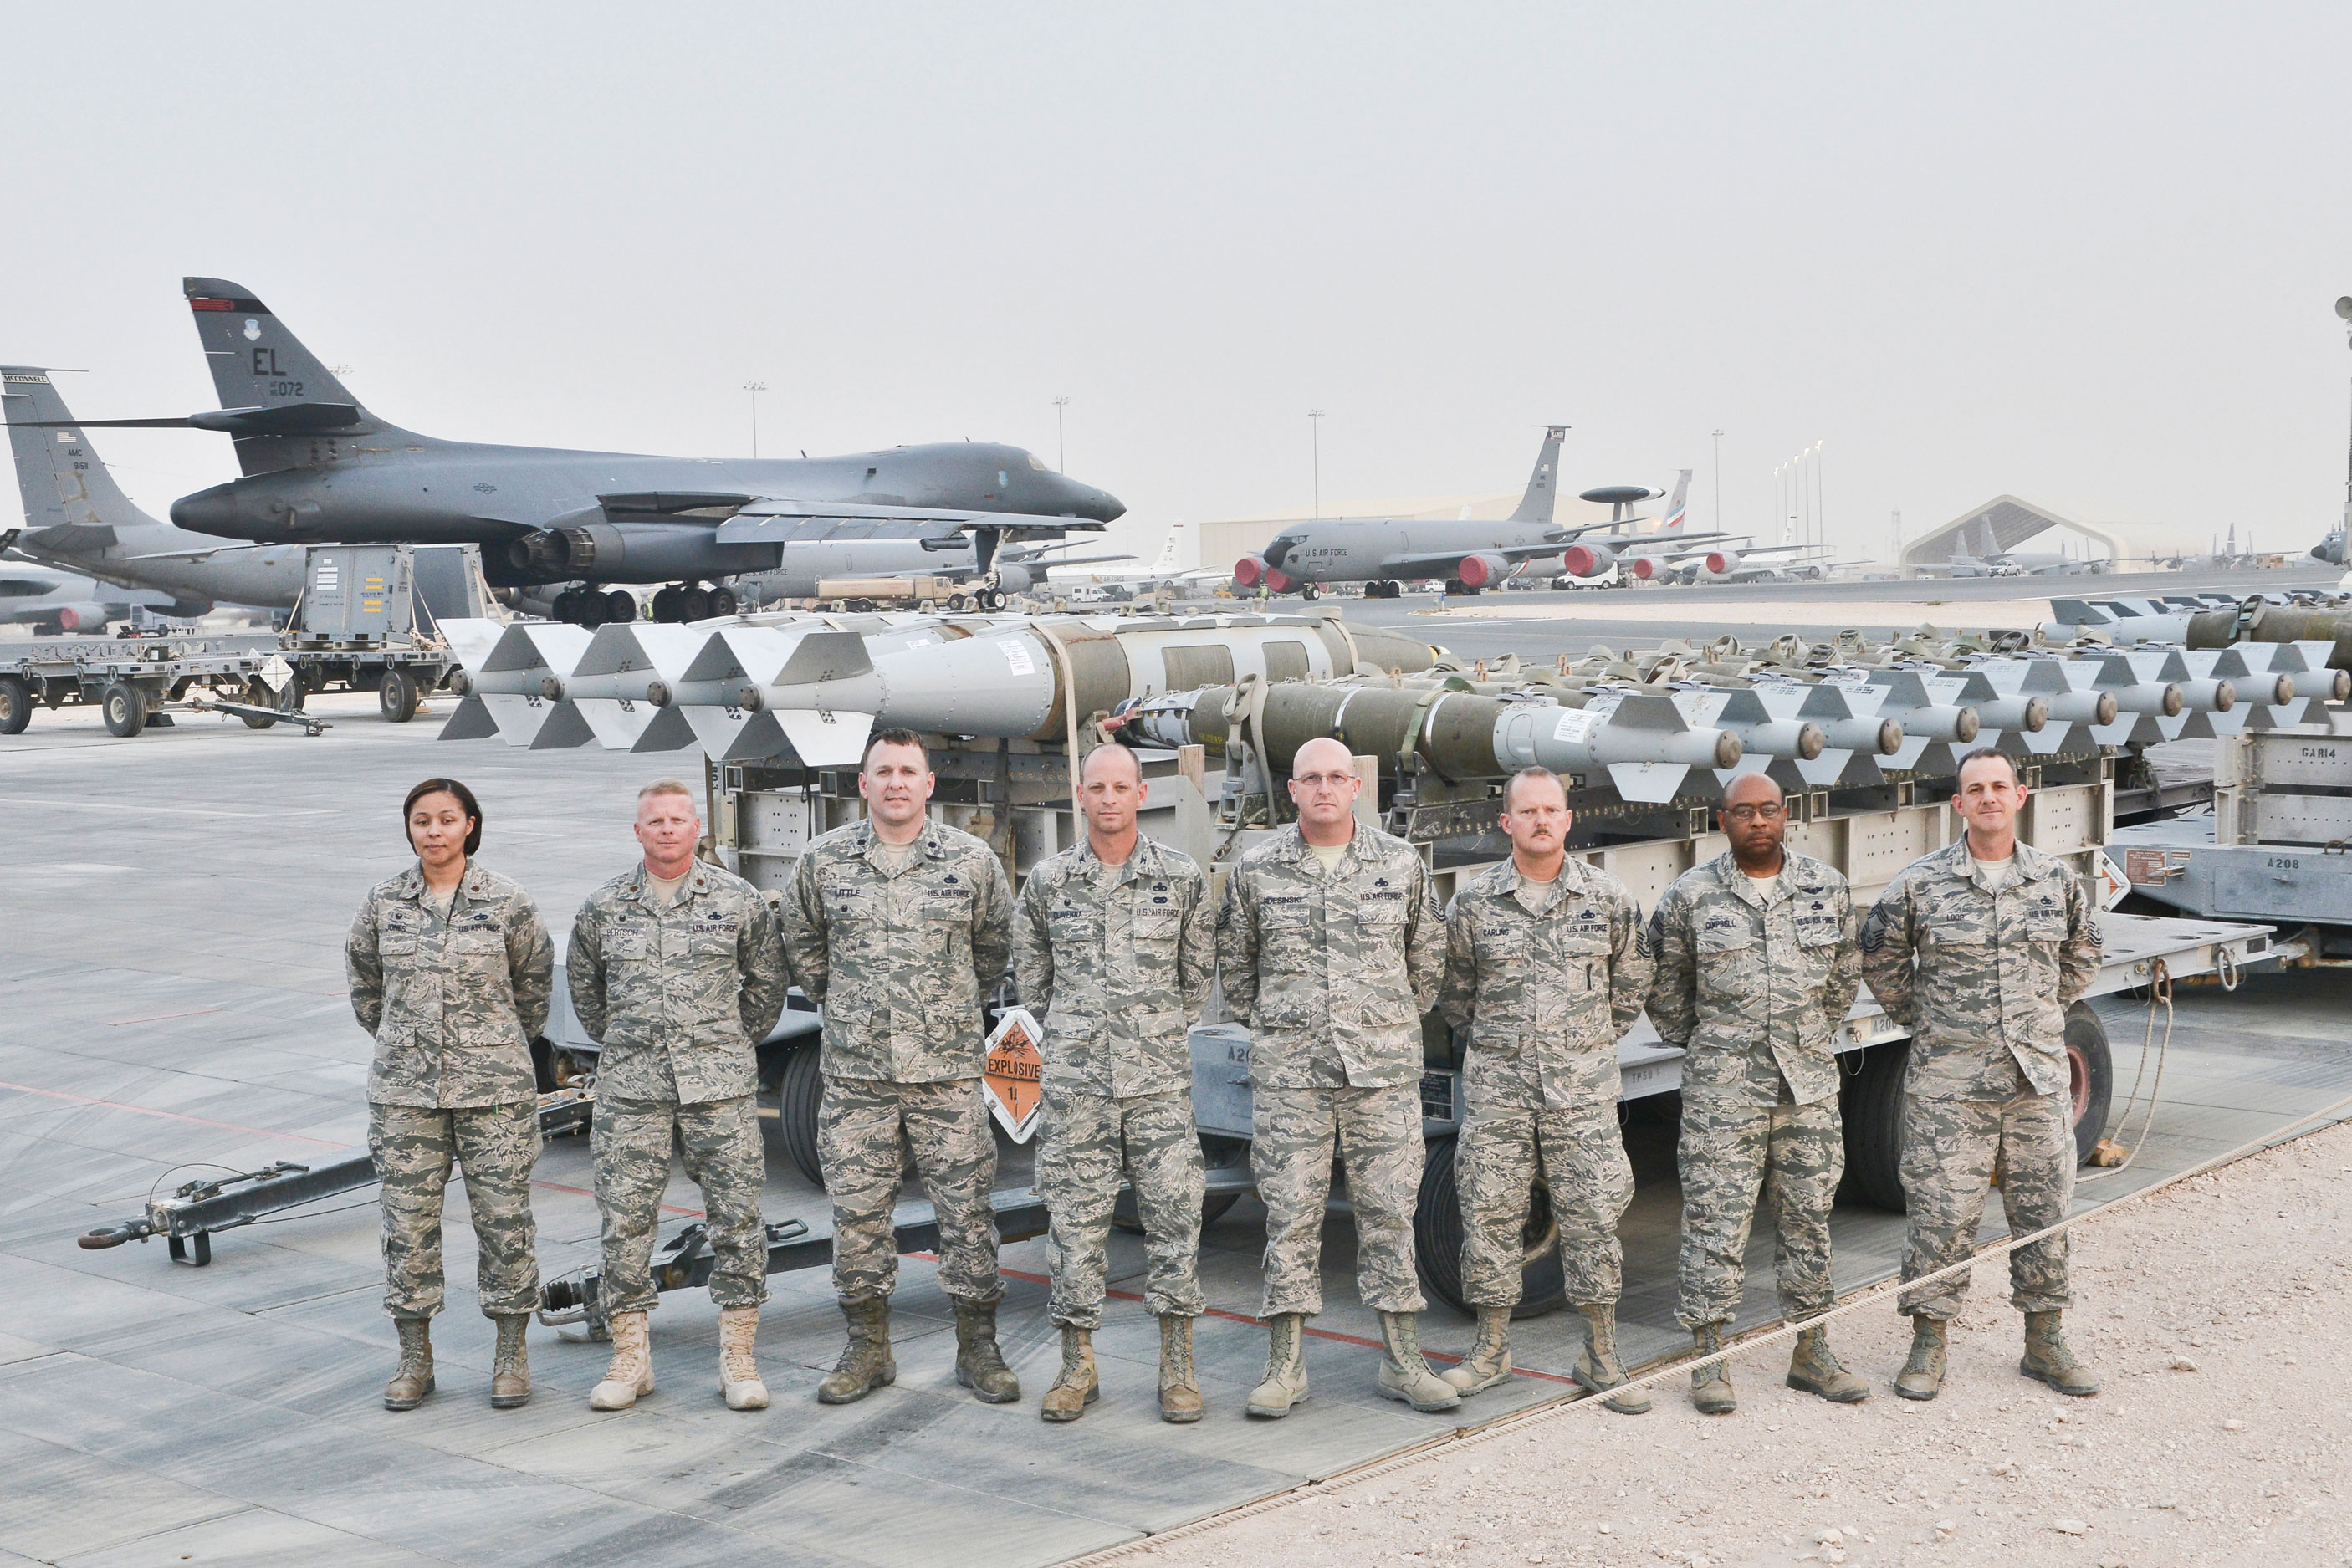 Nevah Jones stands with his Air Force Group at Al Udeid Air Base in Qatar